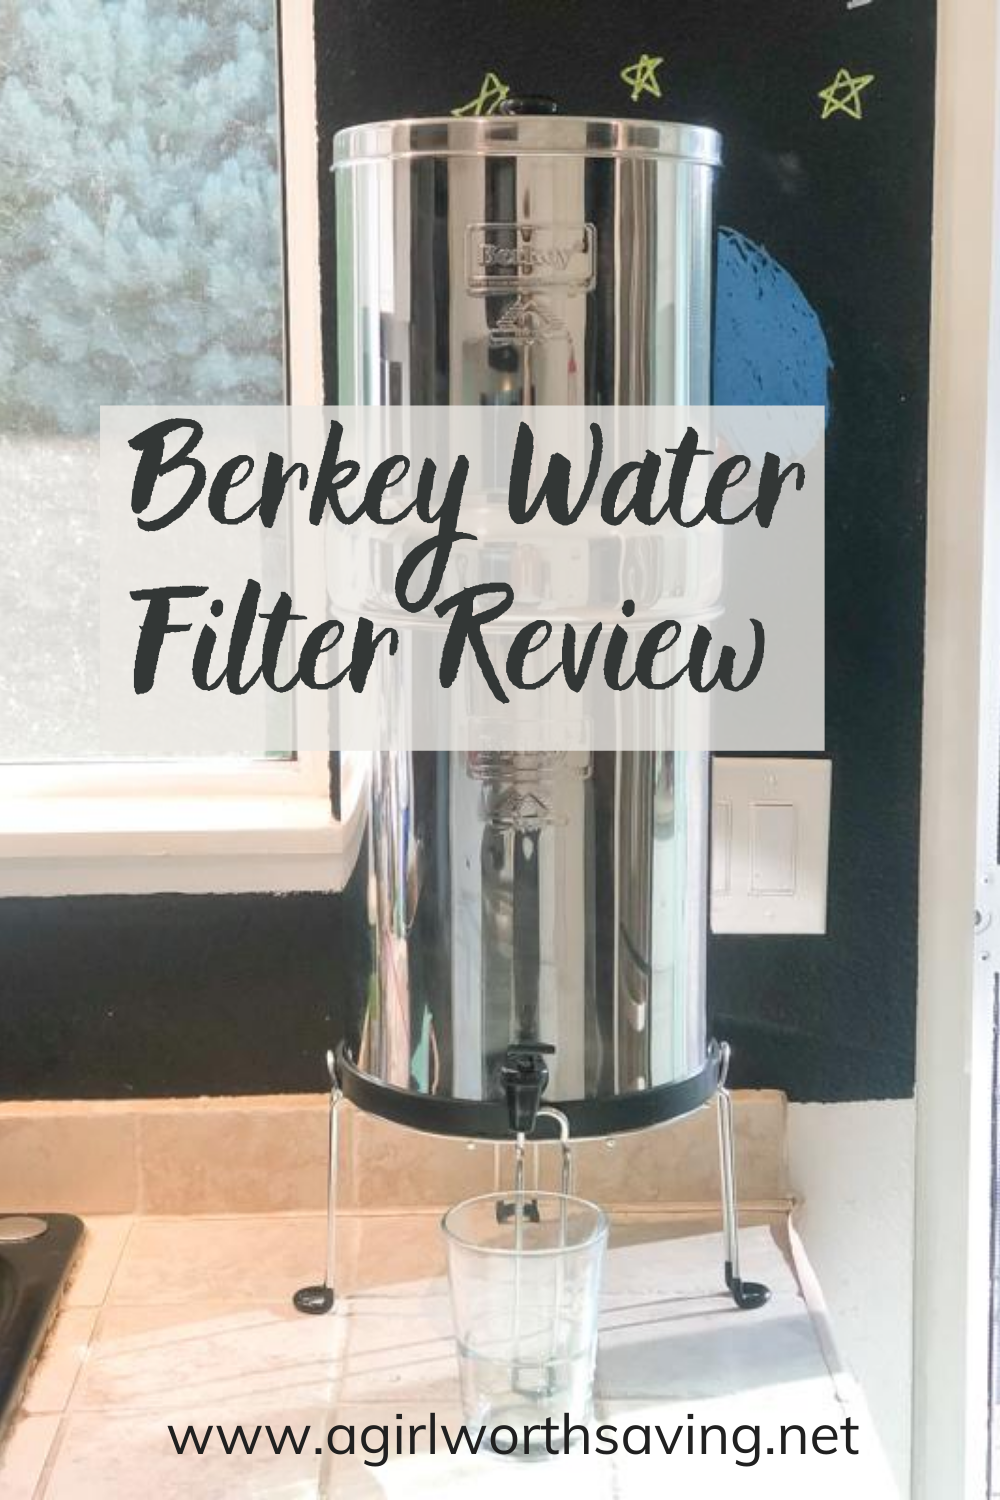 There are several ways to safeguard the water supply to your home. In this Berkey Water Filter Review post, we'll look at the benefits of gravity water filters. The Berkey Water Filter is our top choice for keeping the drinking water in our home safe.